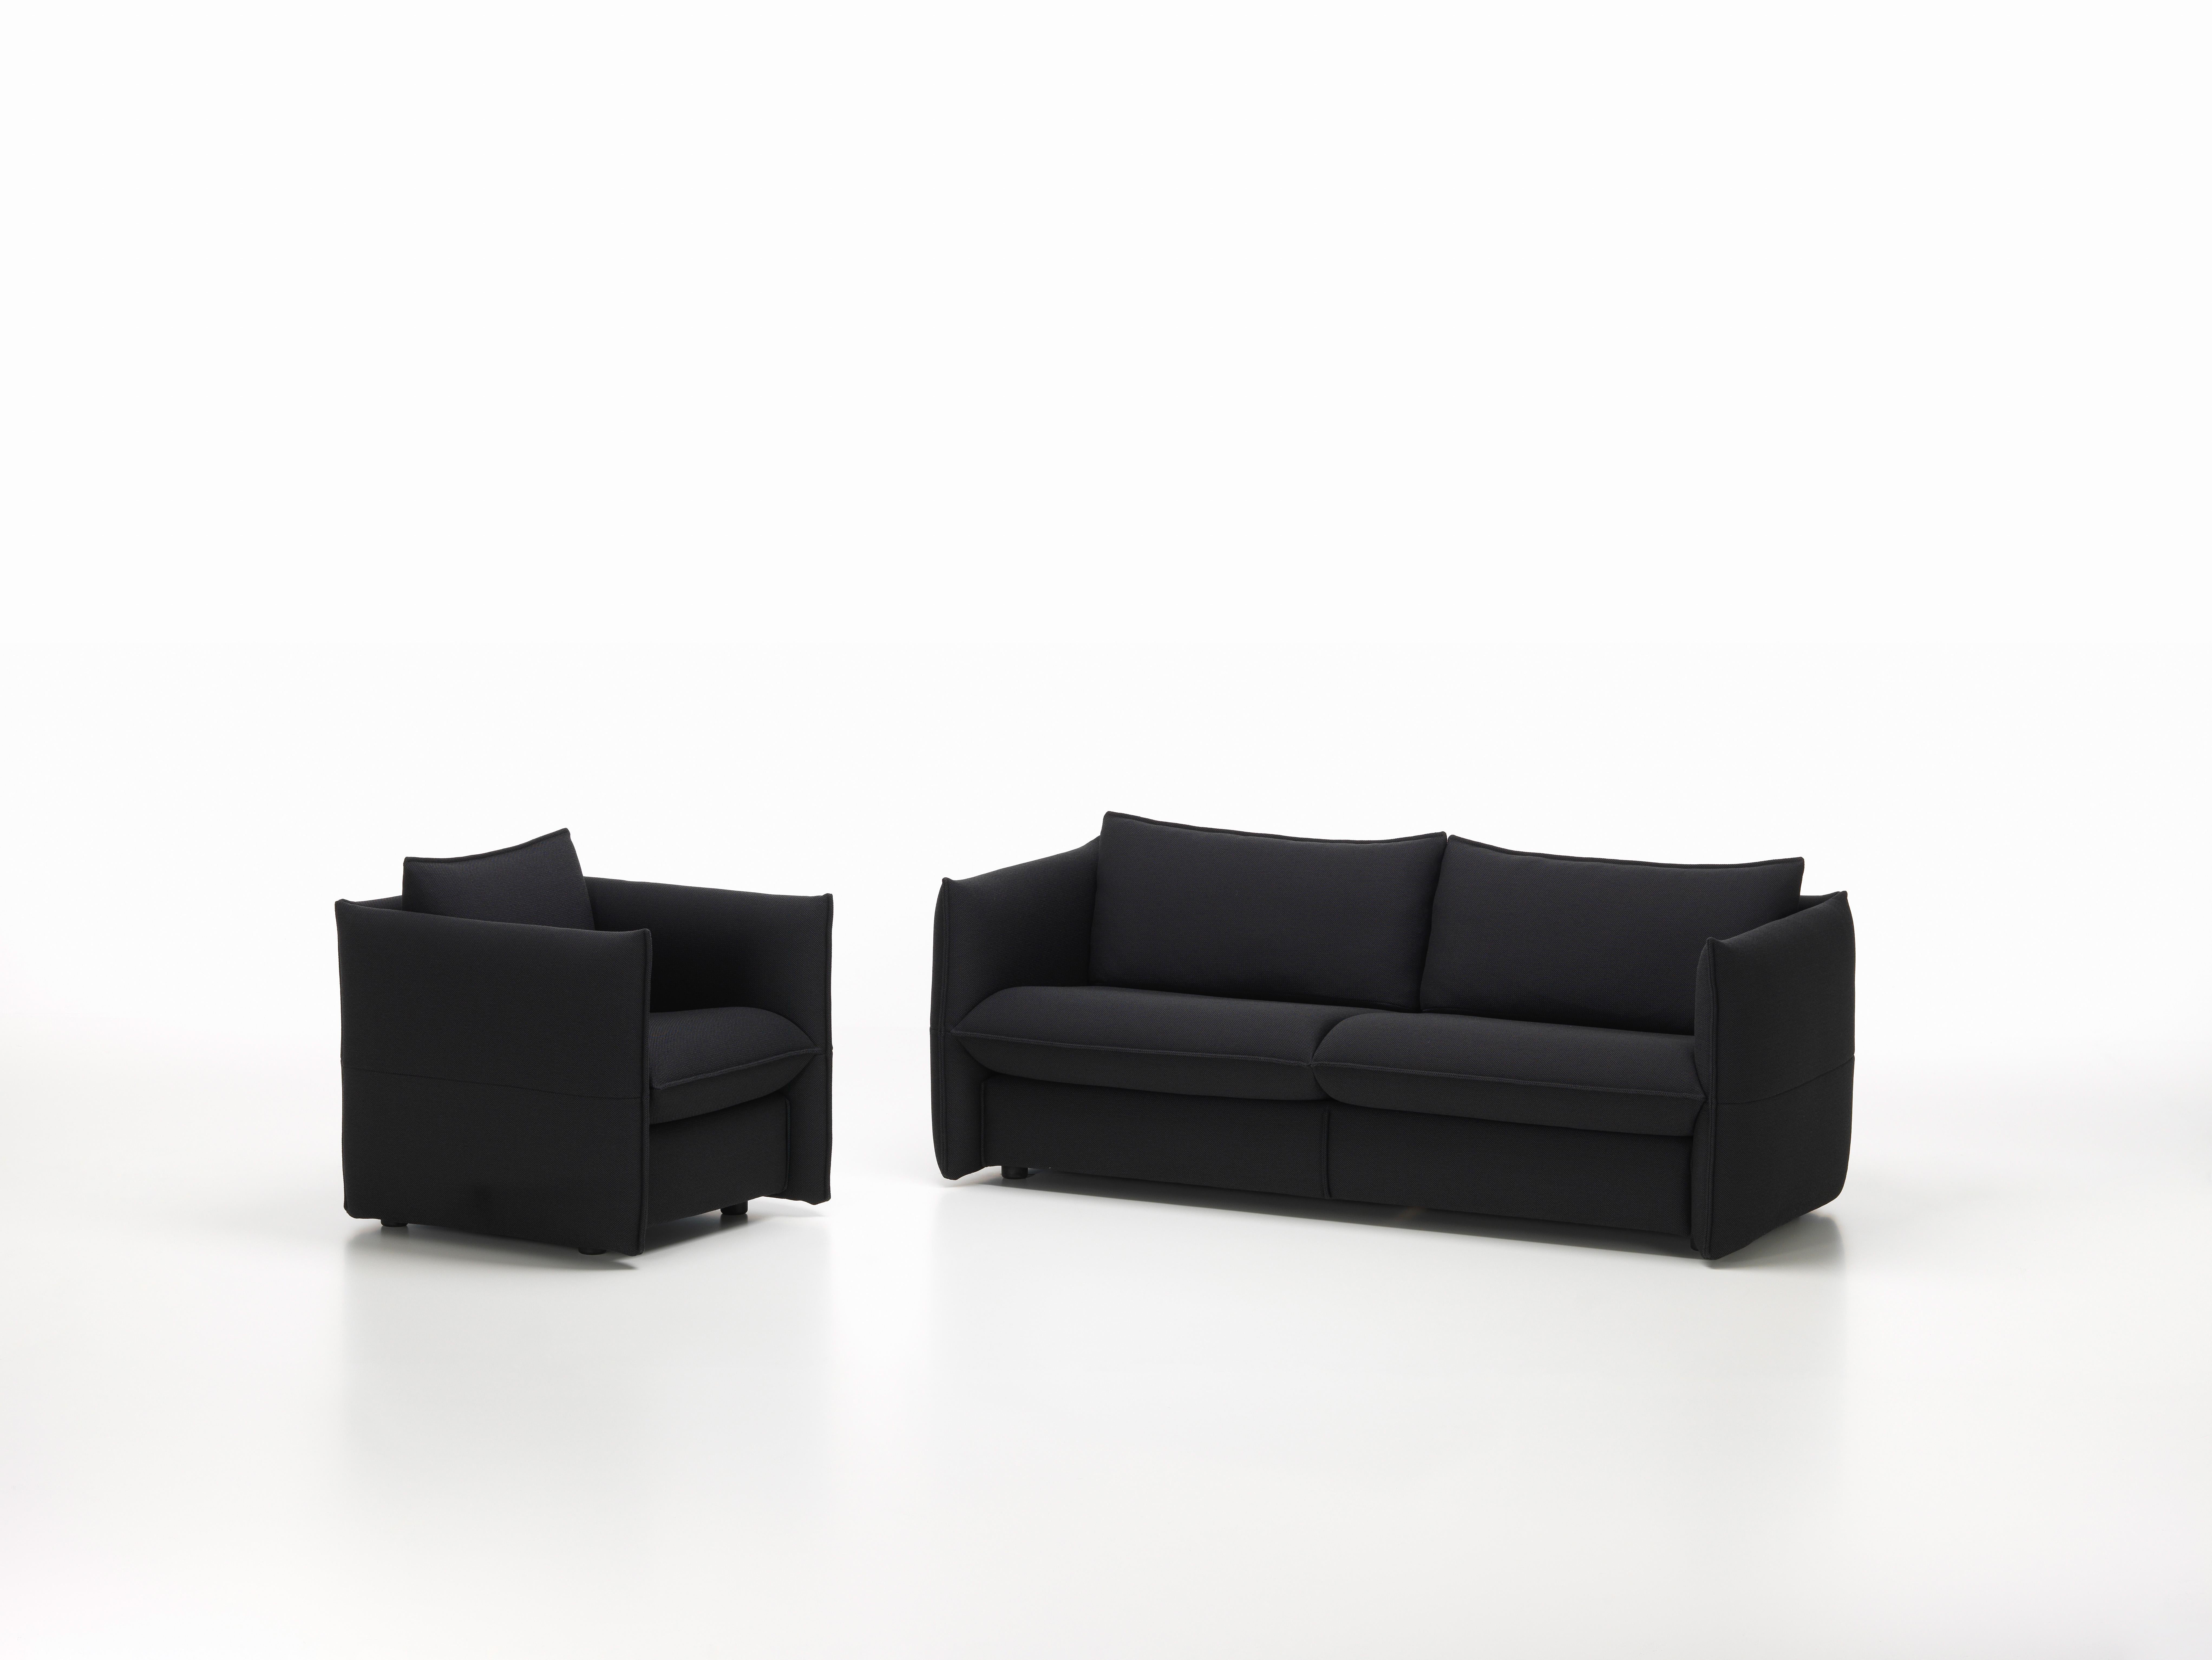 Swiss Vitra Mariposa Club Armchair in Nero Plano by Edward Barber & Jay Osgerby For Sale